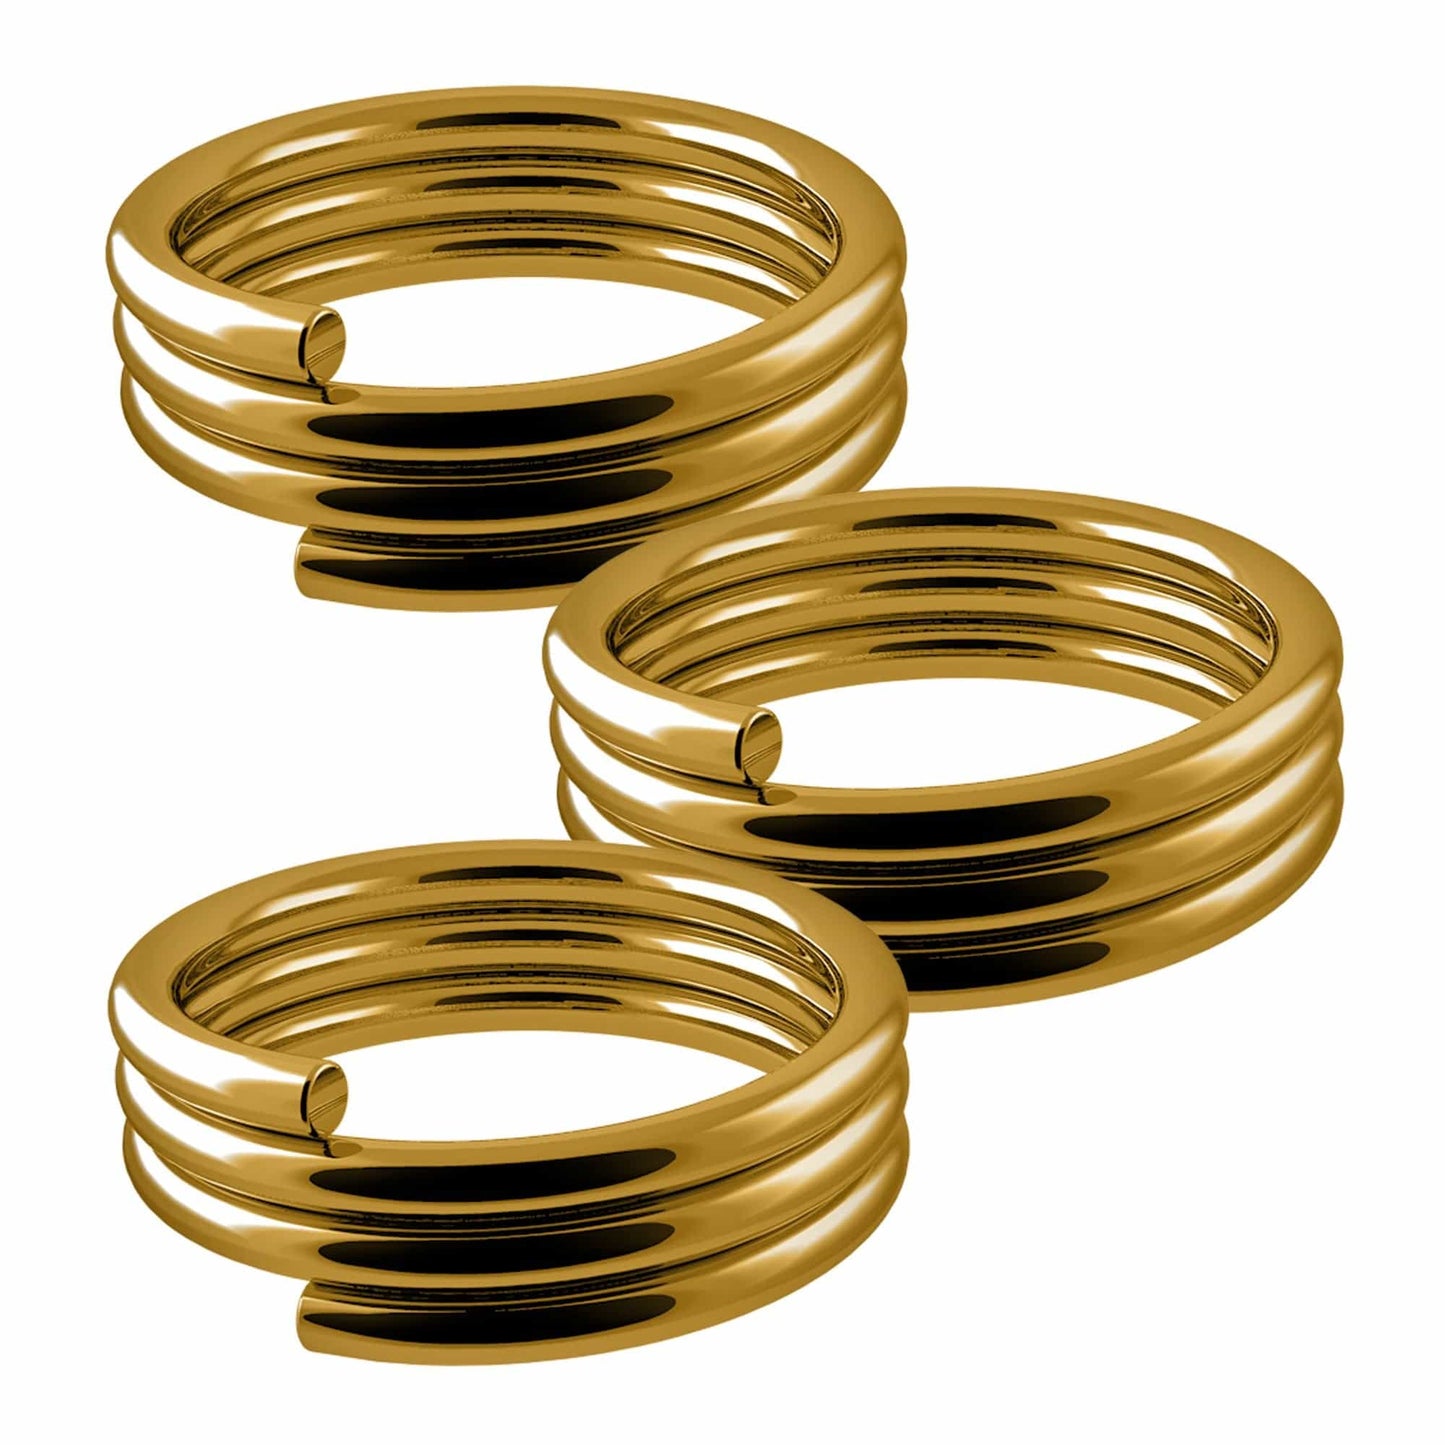 Designa Springs - for use with Nylon Shafts - 50 Sets (150) Gold